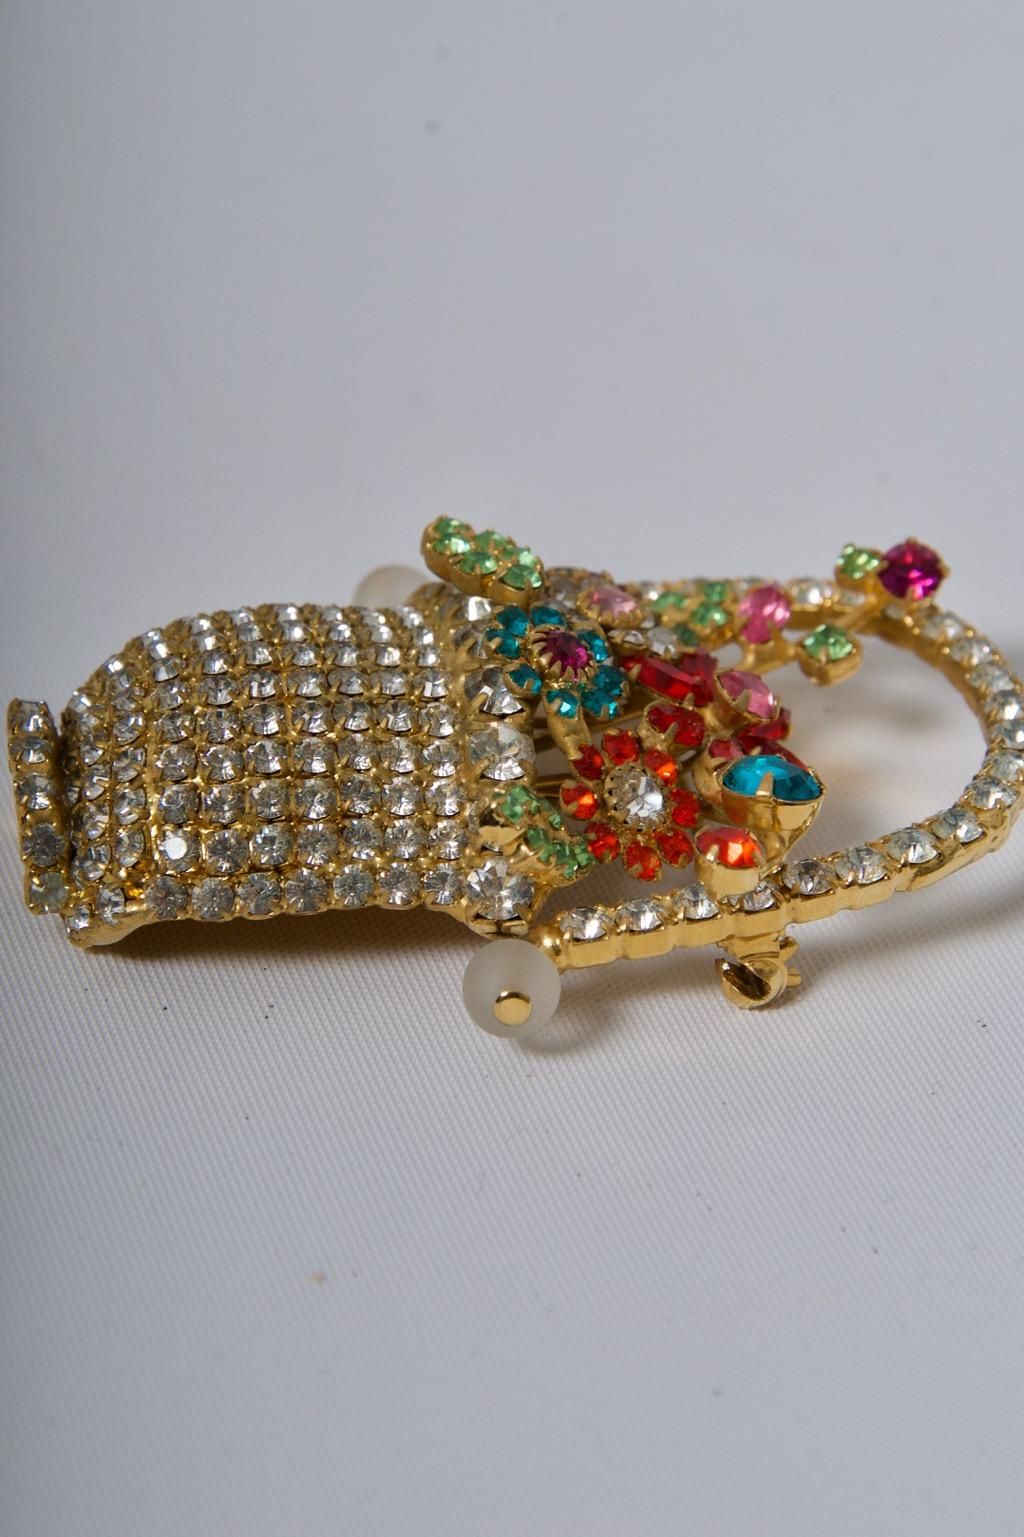 Dorothy Bauer was known for her sculptural, whimsical jewelry designs incorporating Swarovski crystals, as exemplified by this brooch. She was active in Berkeley, CA, from 1982-2008. the brooch replicates a handled flower basket of clear crystals